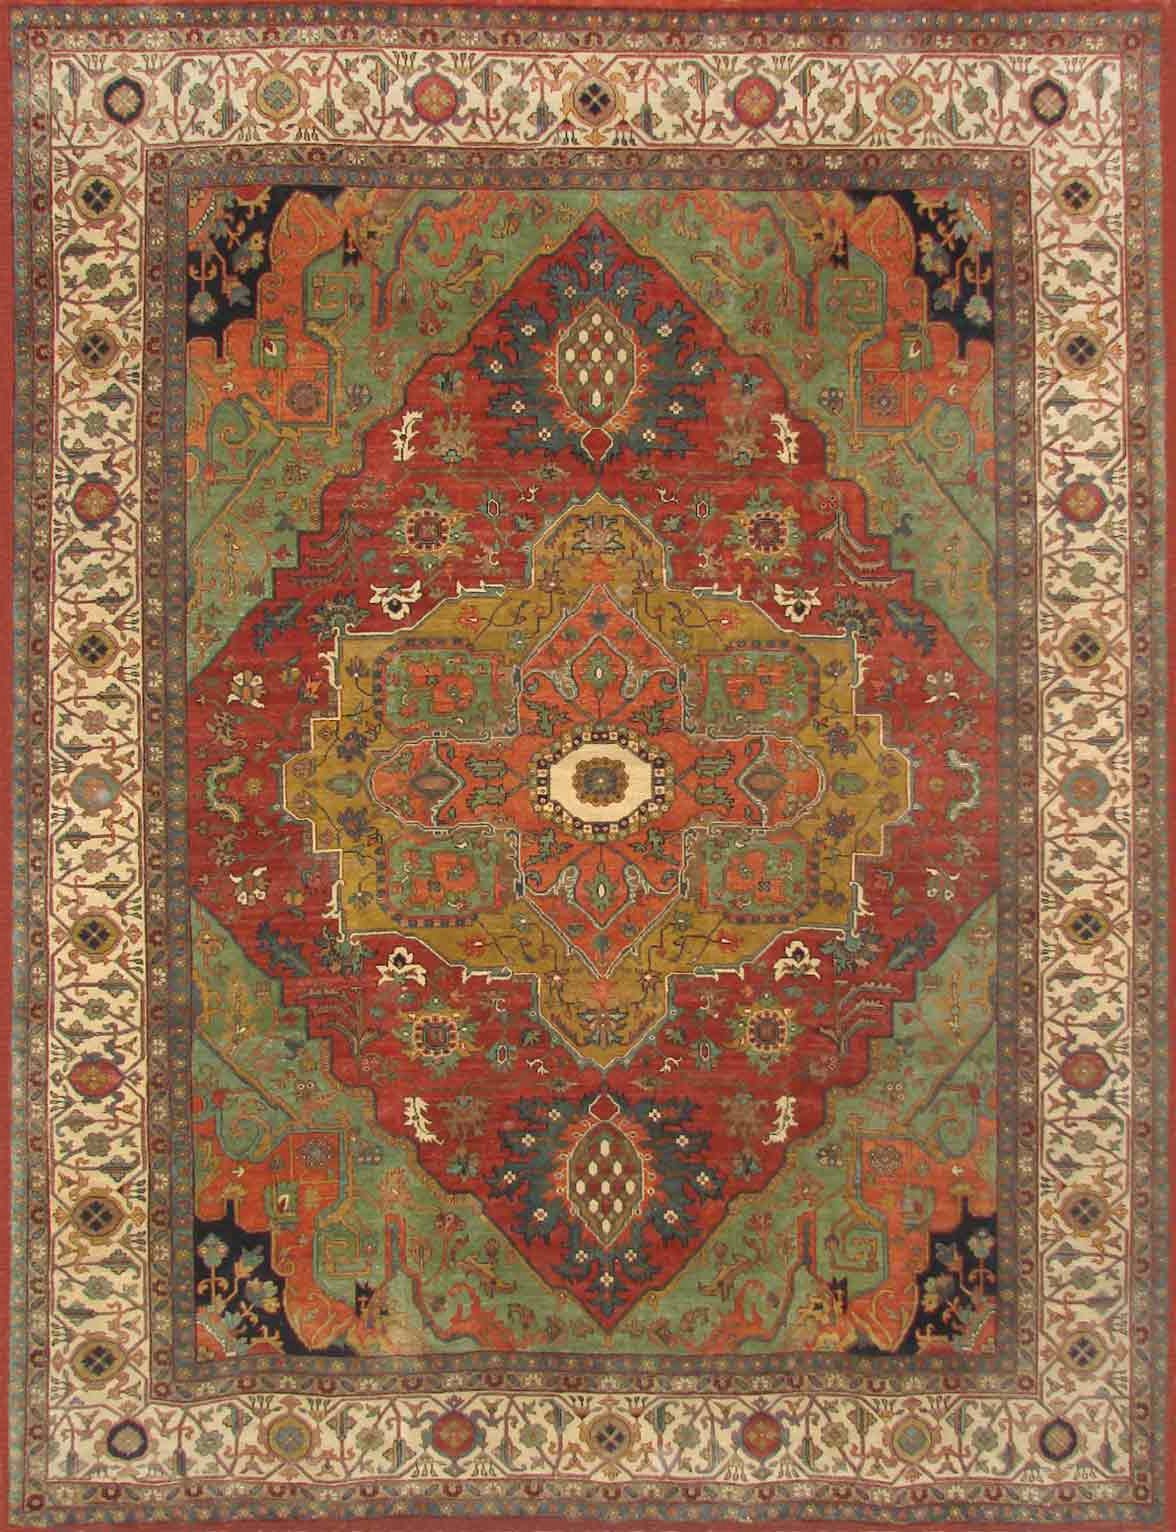 Antique Style Rugs FINE SERAPI 19709 Rust - Orange & Ivory - Beige Hand Knotted Rug